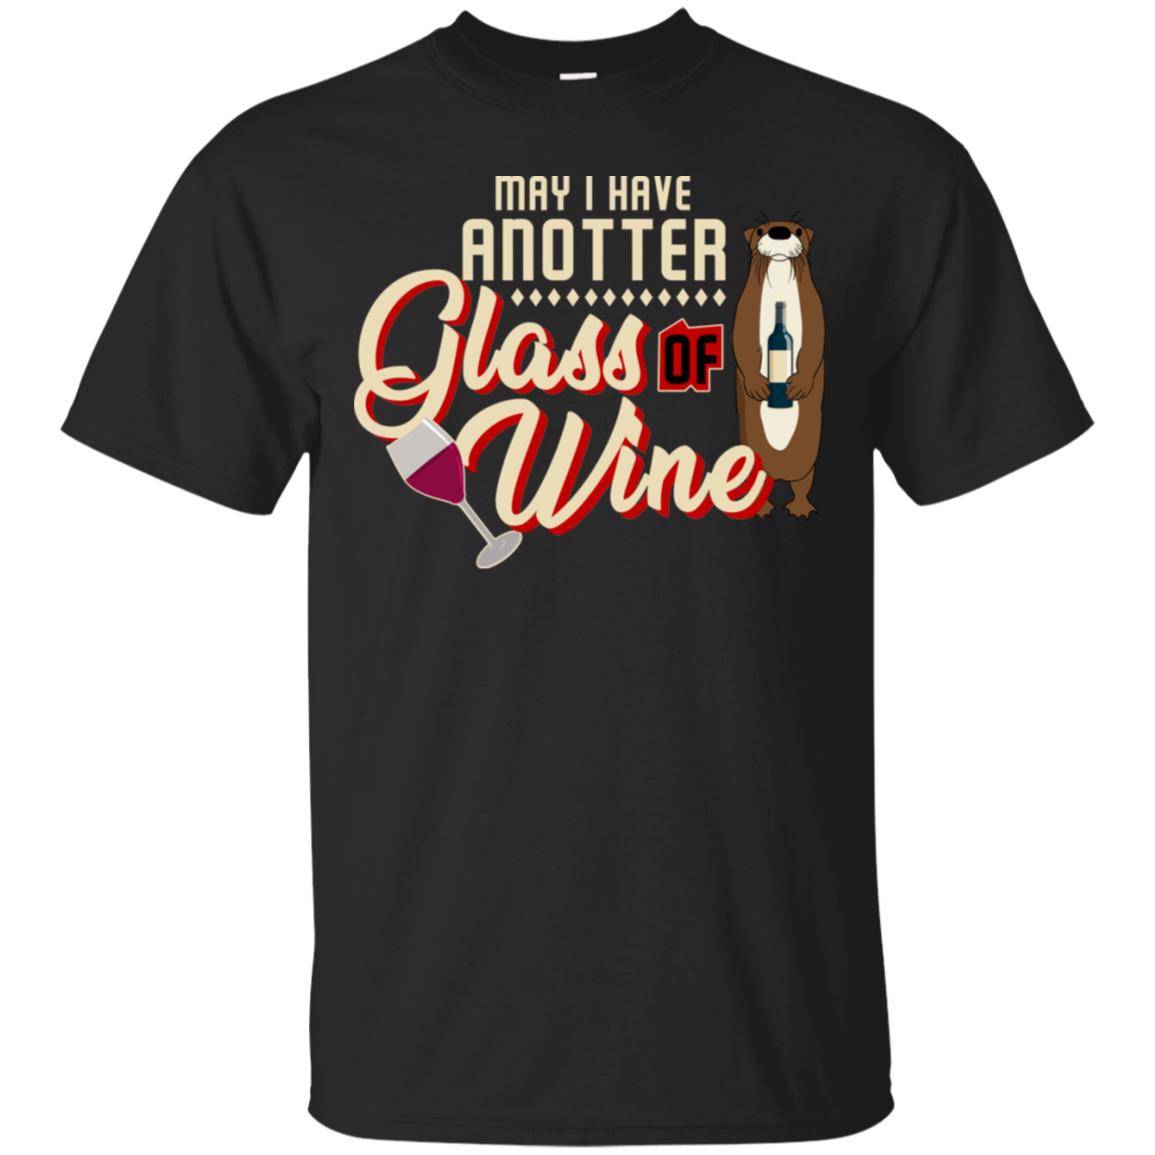 May I Have Anotter Glass Of Wine Funny Otter Shirt For Drinking LoversG200 Gildan Ultra Cotton T-Shirt